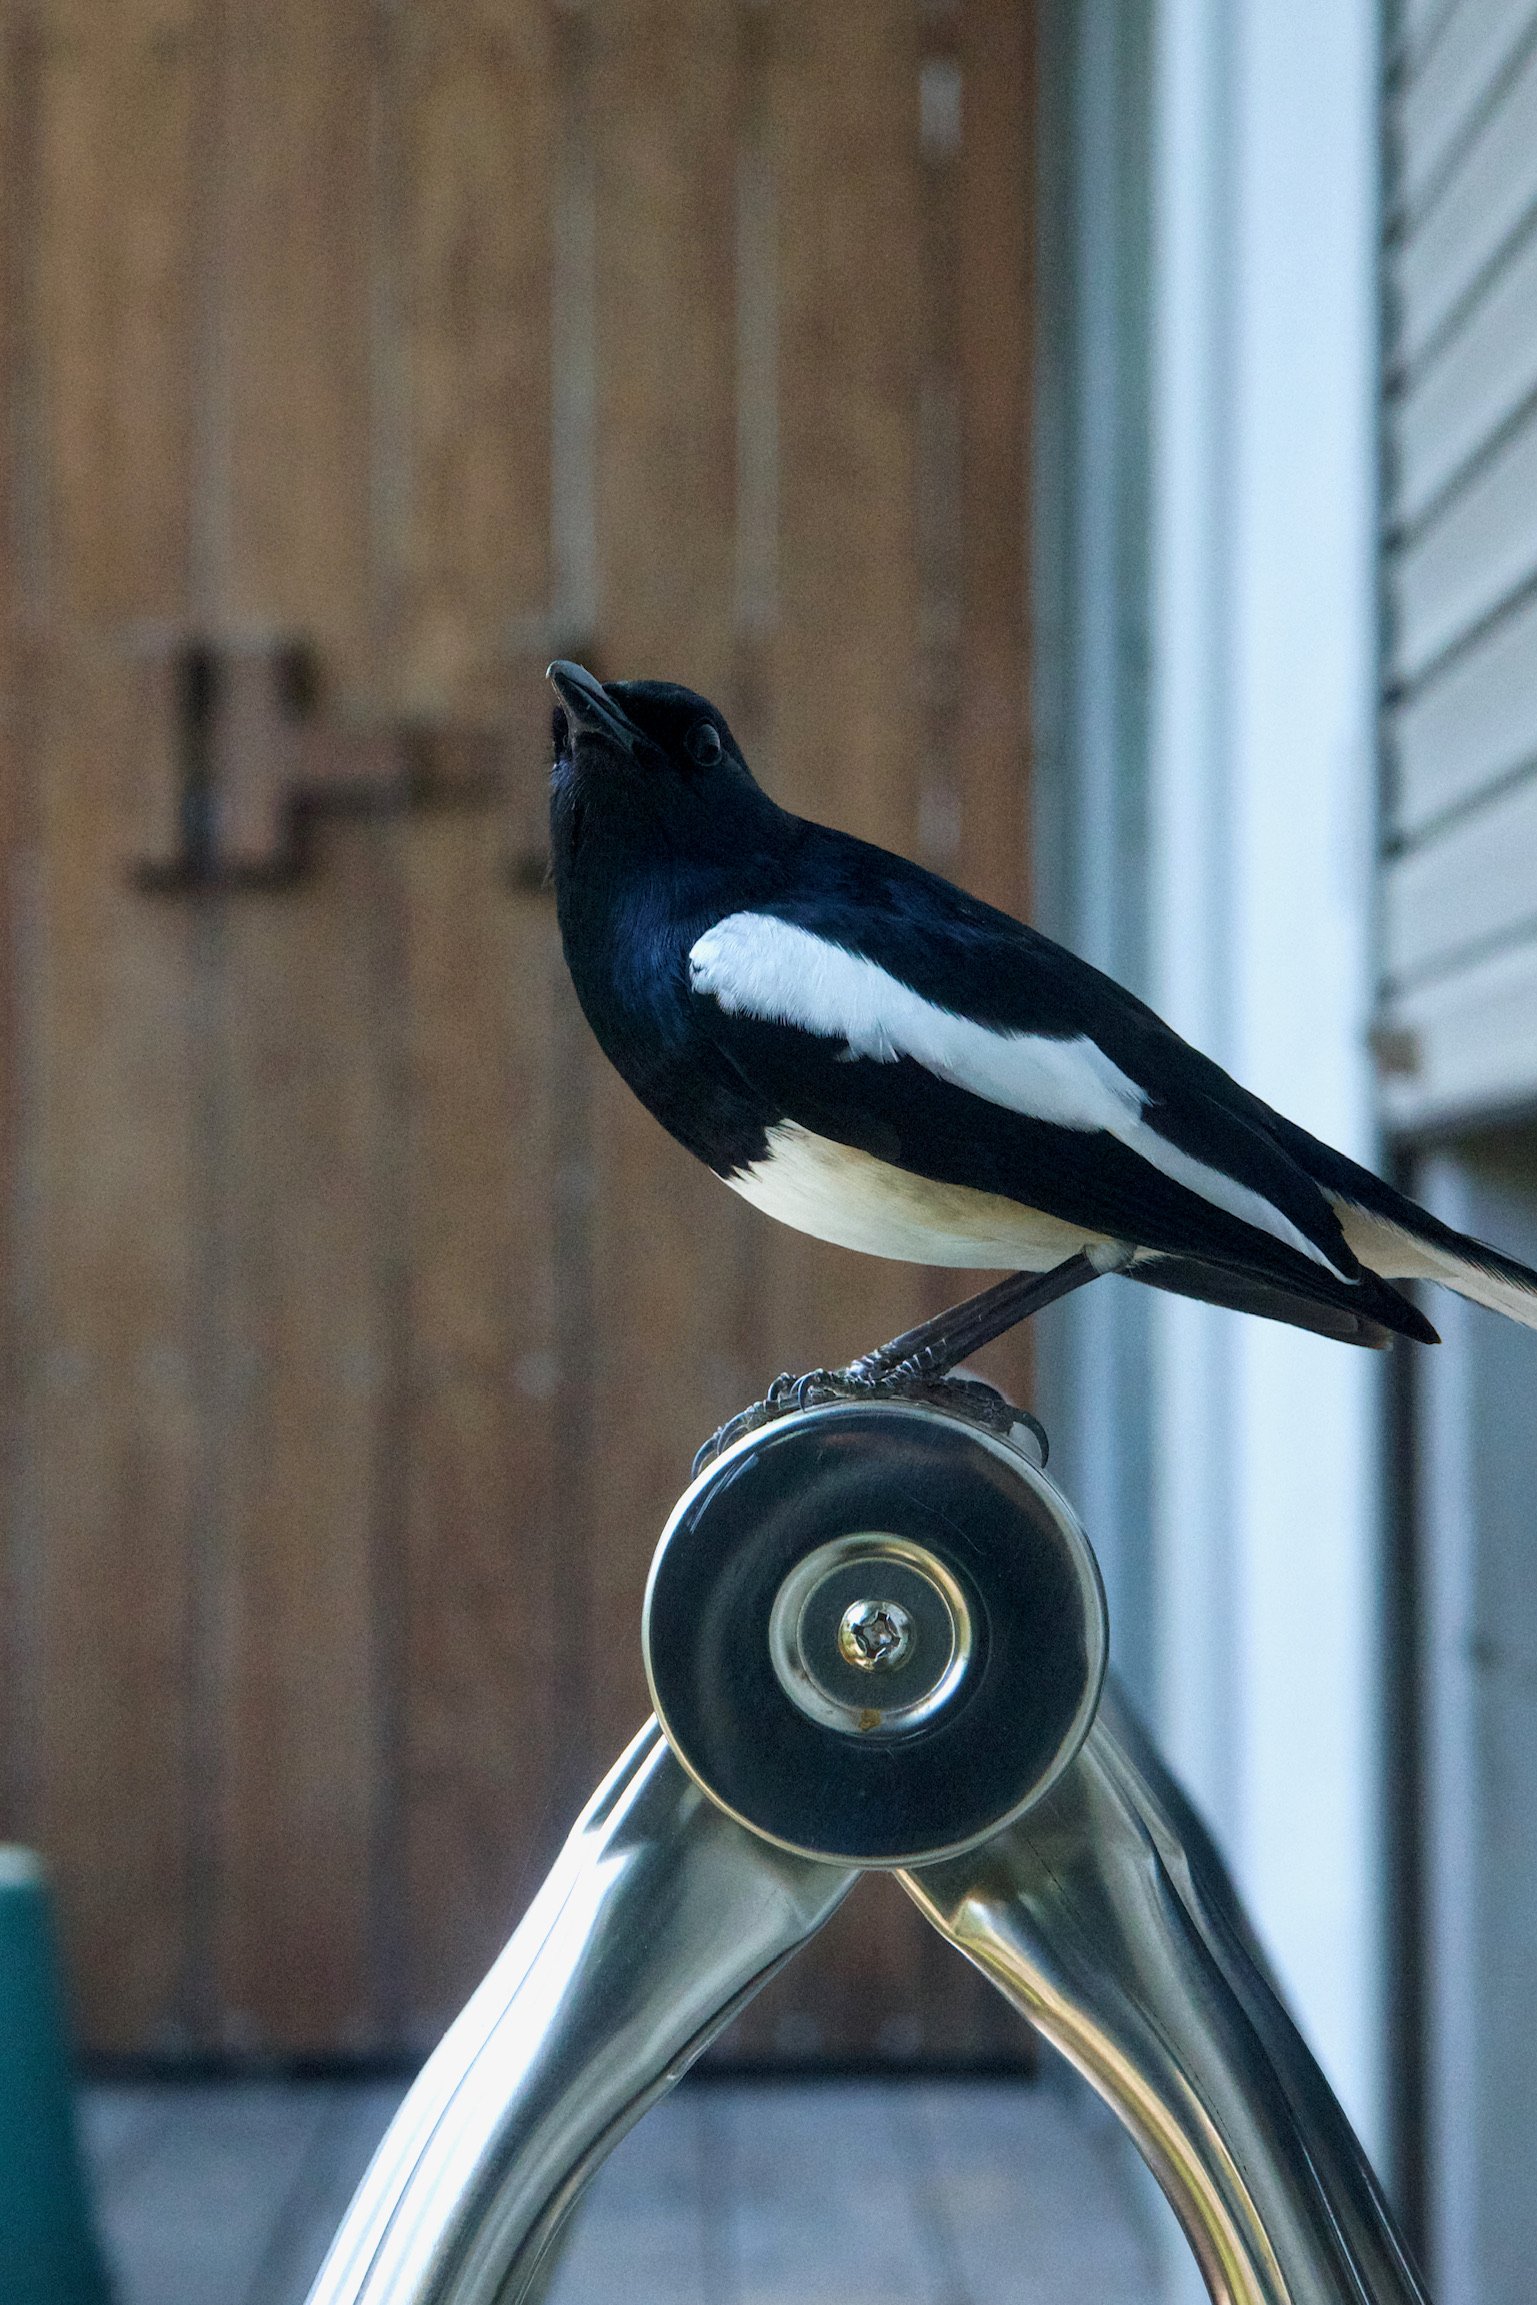 An Eurasian magpie of black and white patterns standing on a drying rack.